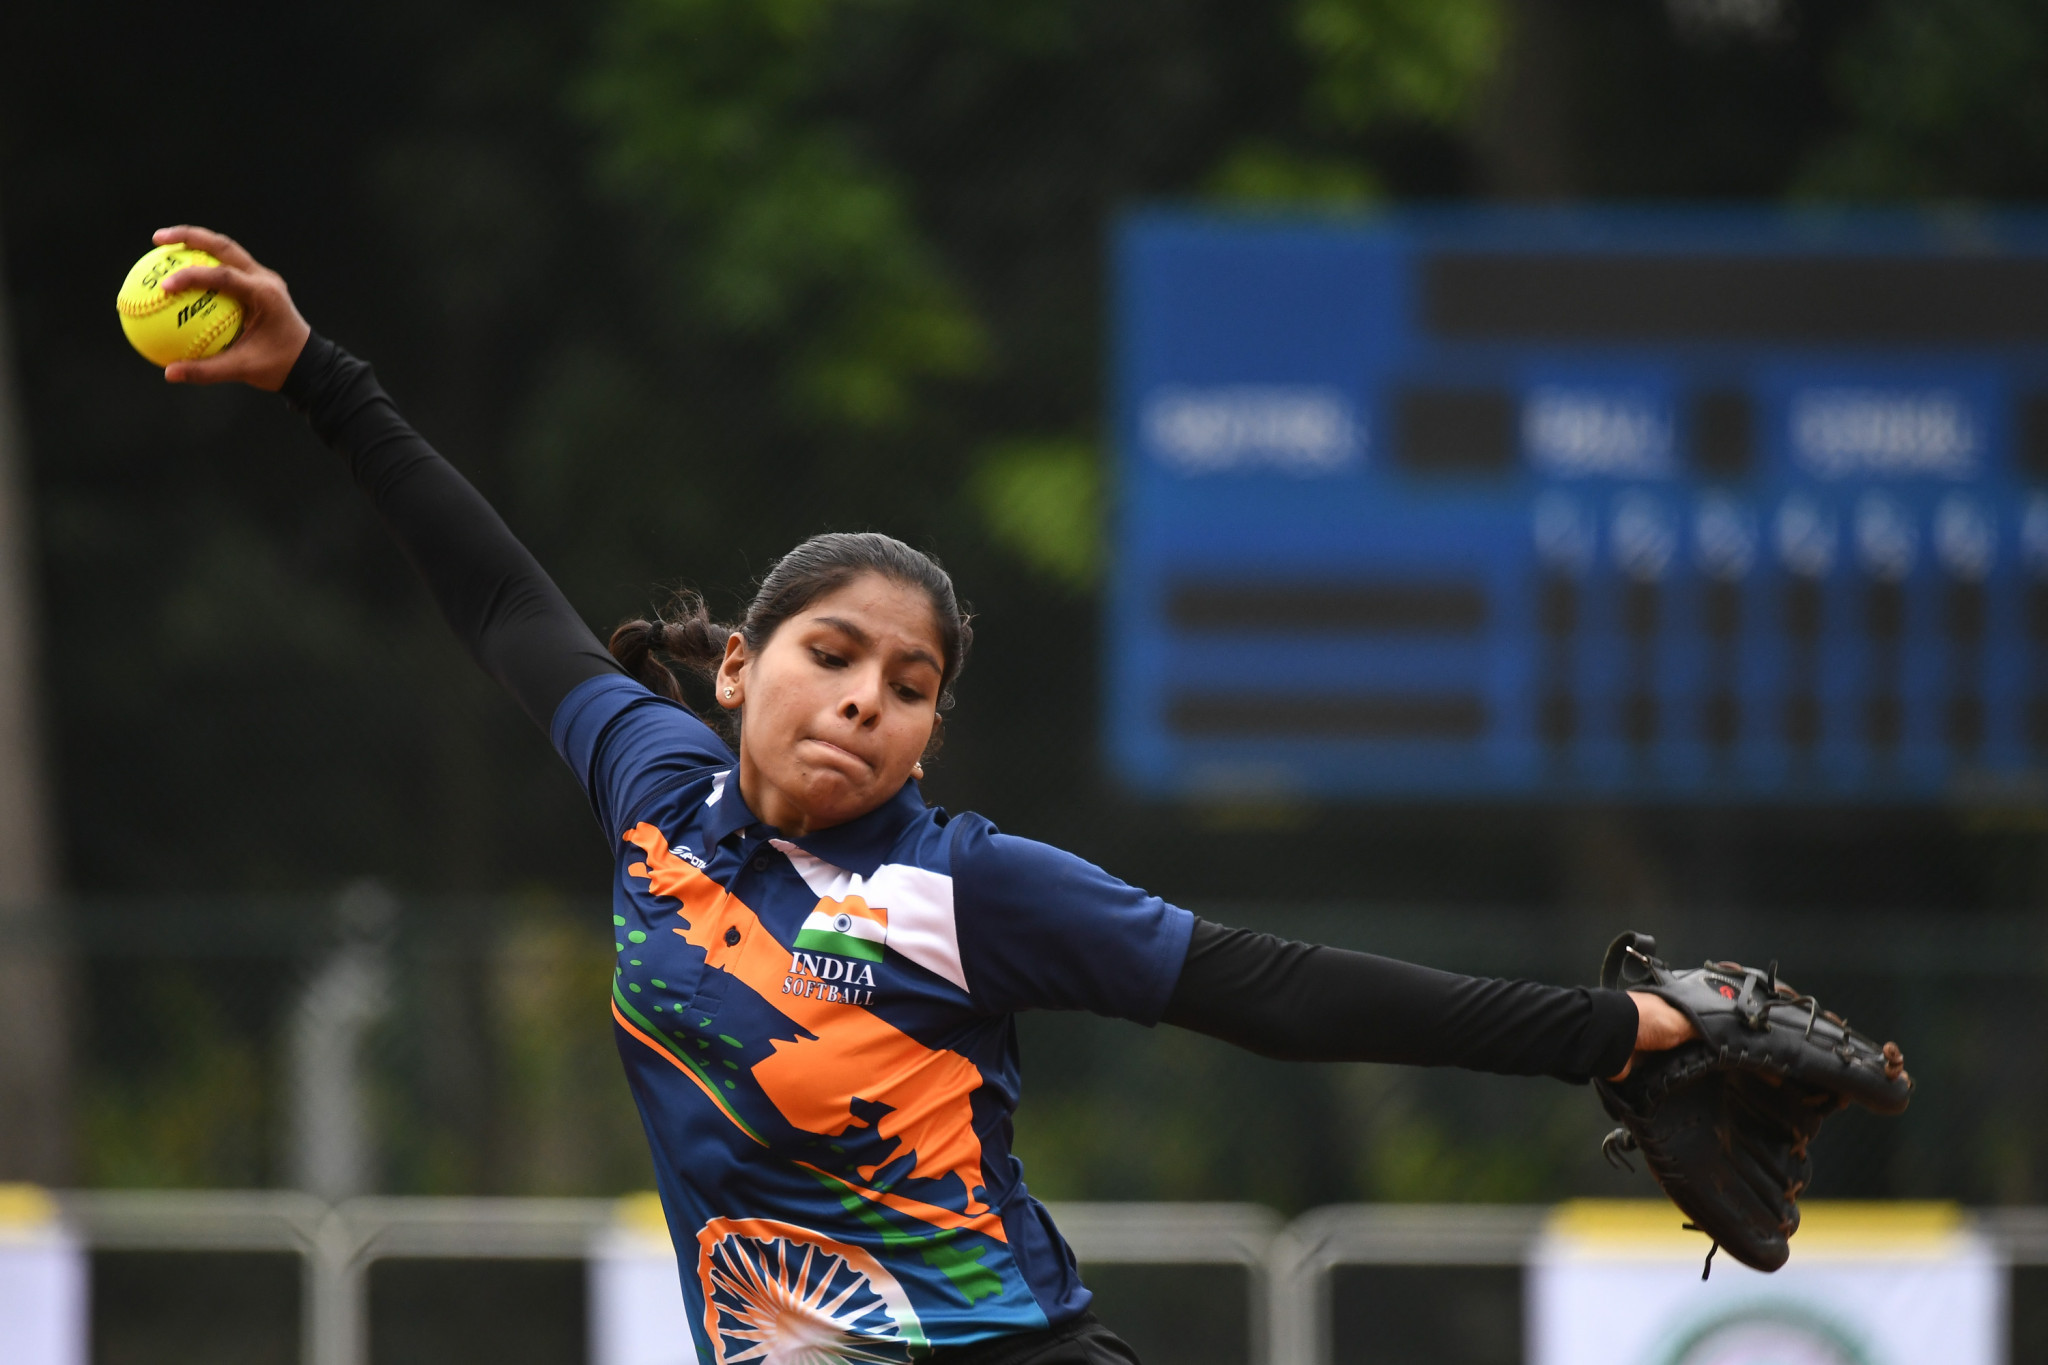 The Indian women's softball team is due to debut at the Hangzhou 2022 Asian Games ©Getty Images